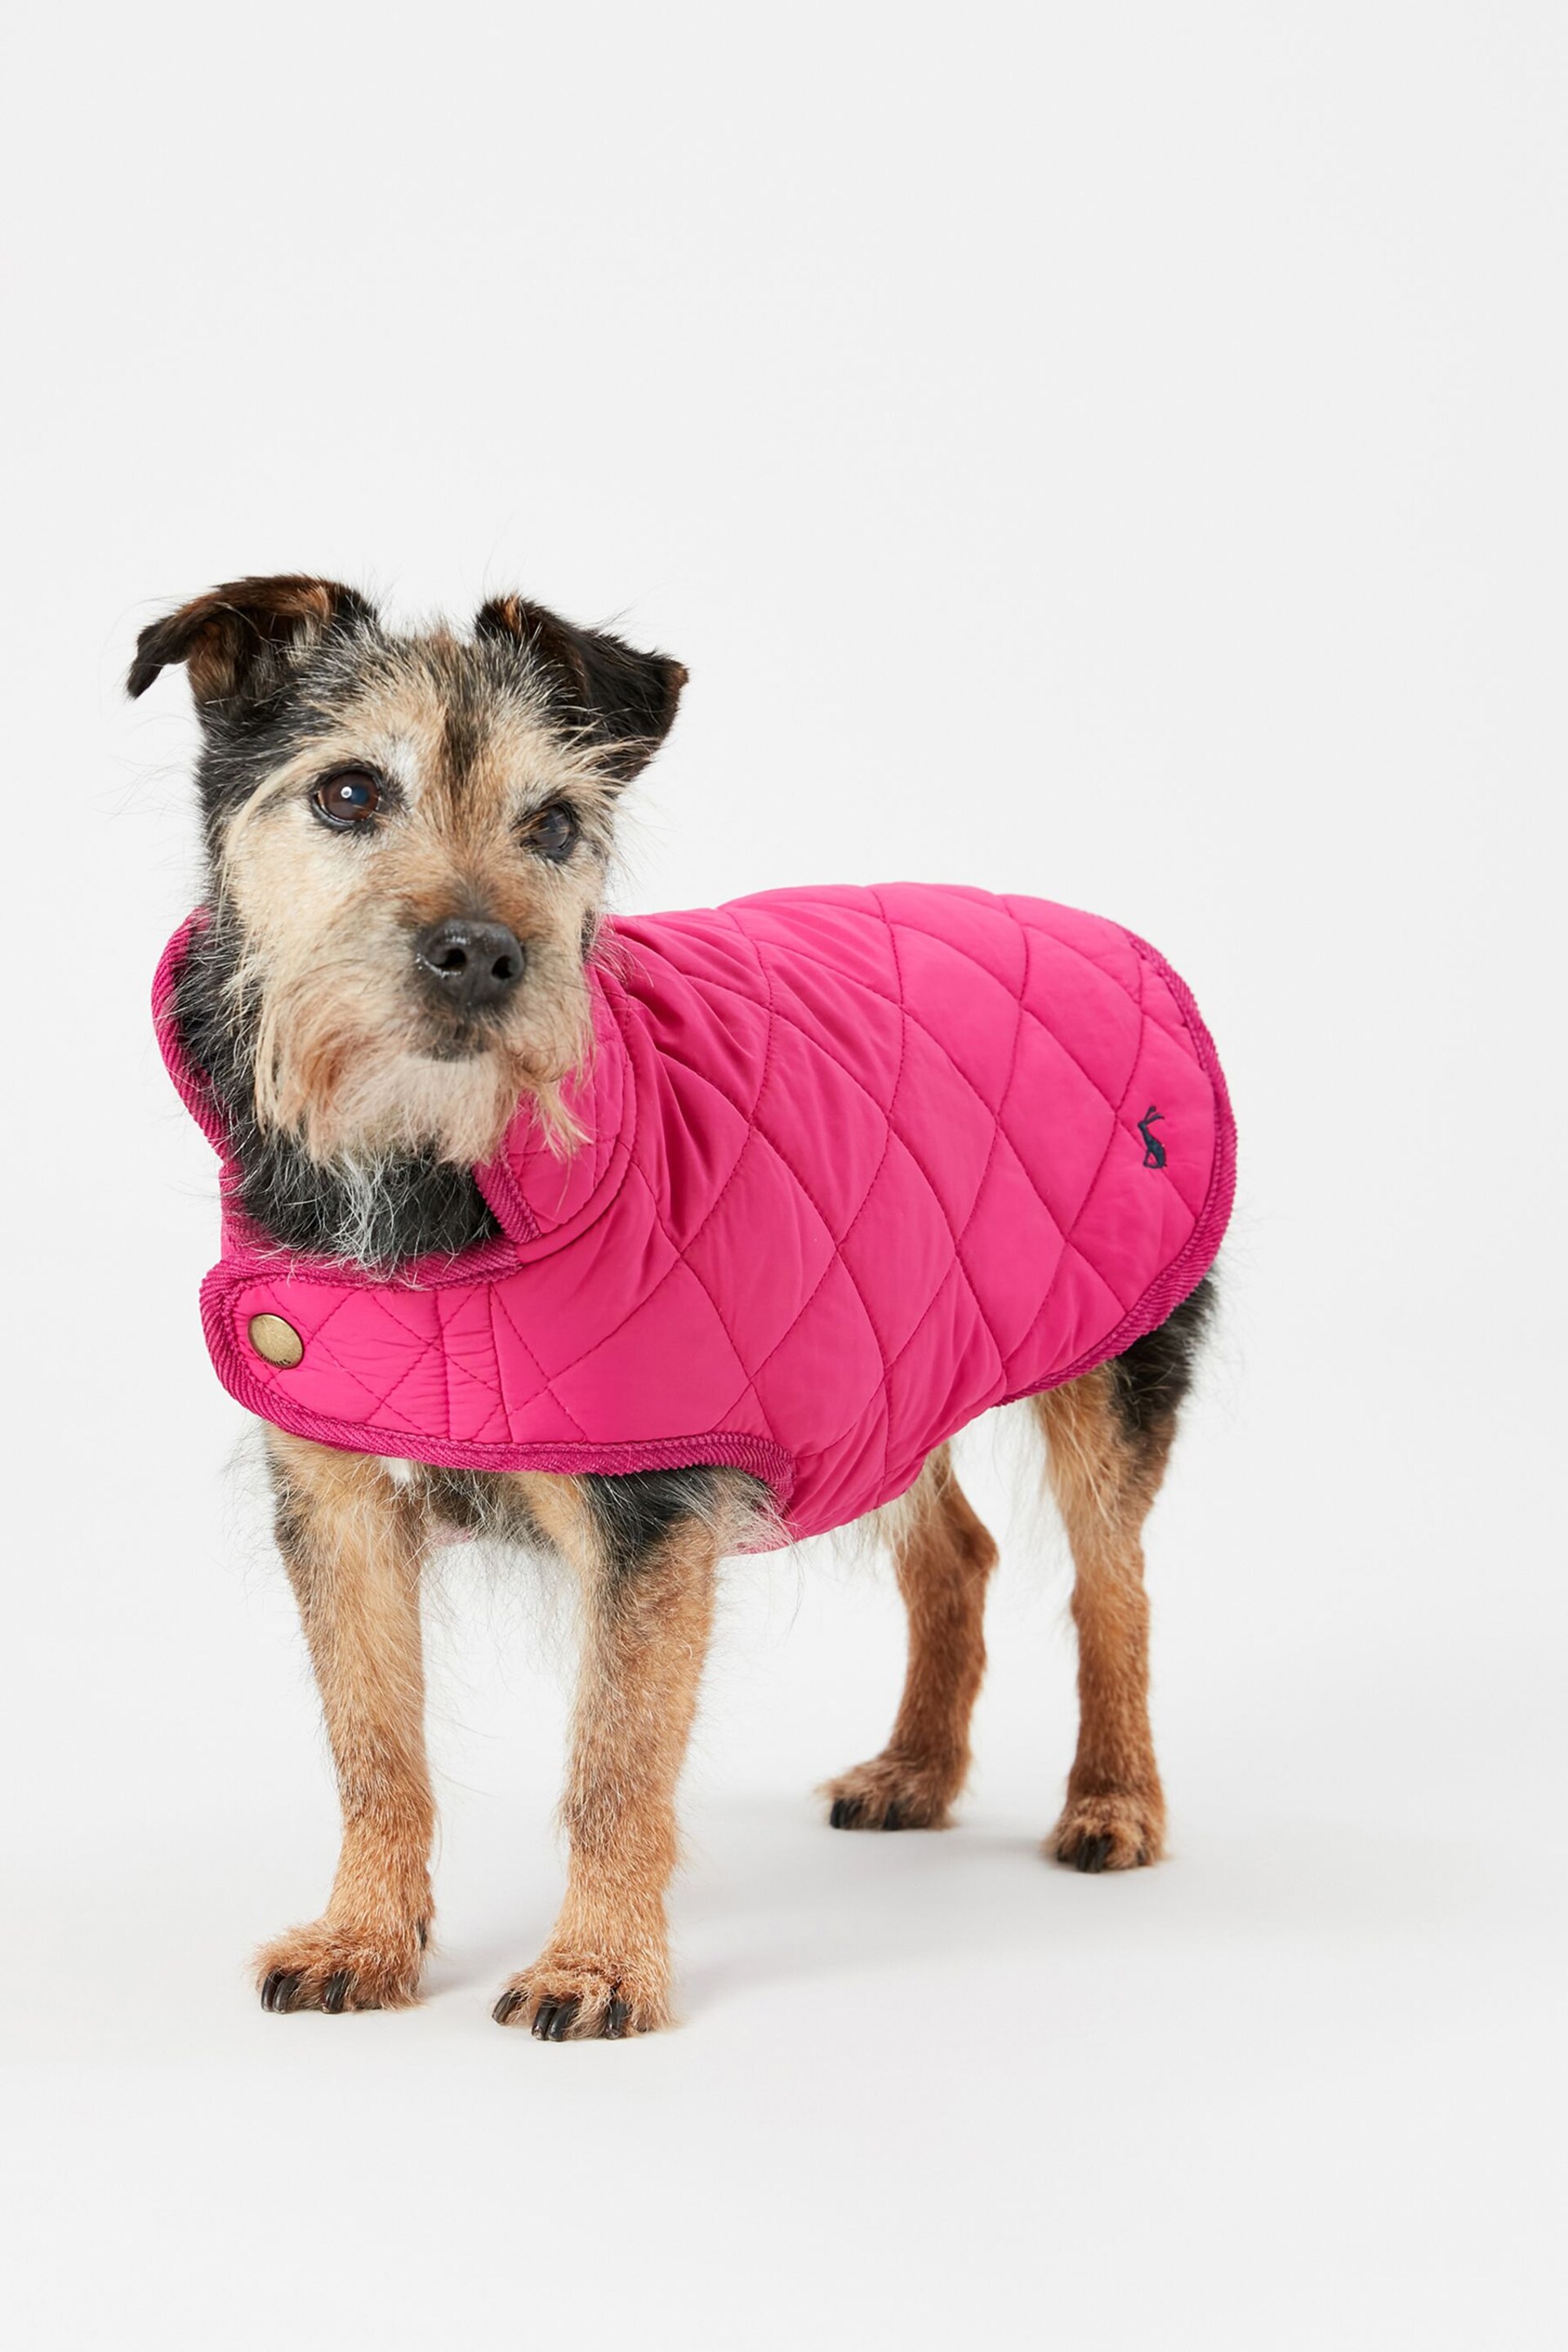 Joules Raspberry Pink Quilted Rain Dog Coat - Image 2 of 4